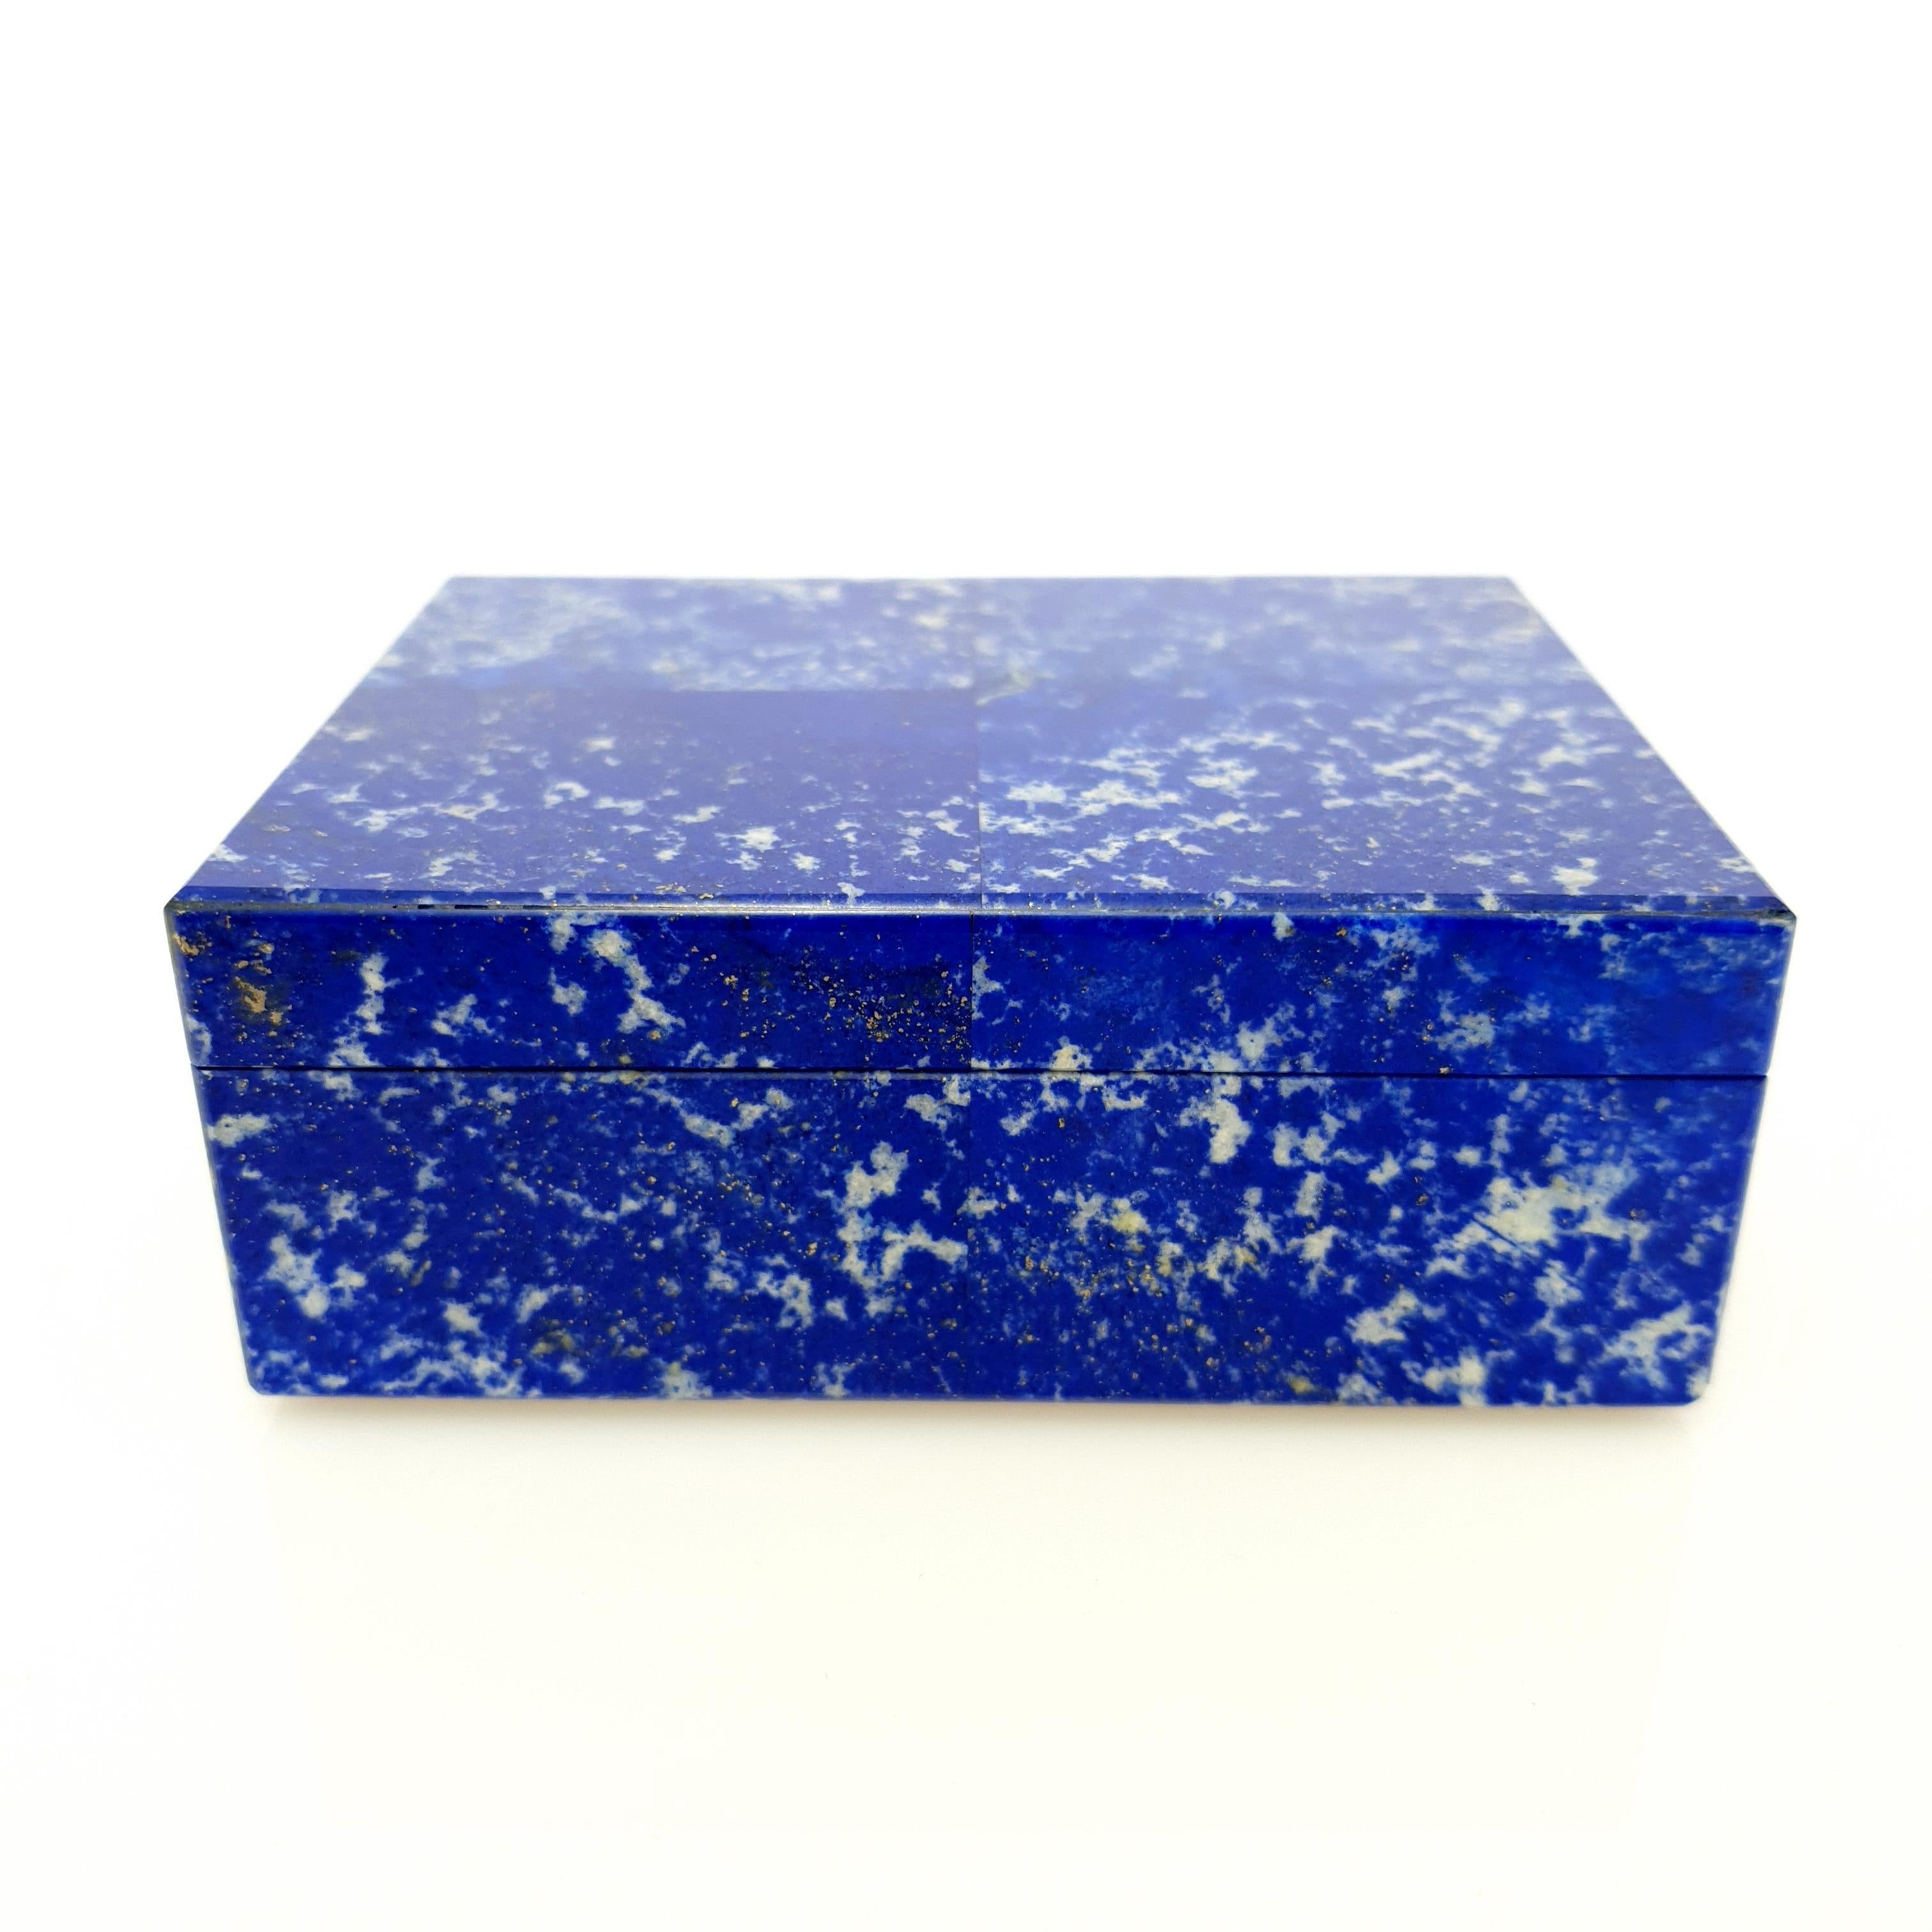 A handmade Natural White Blue Lapis Decorative Jewelery Box.
The pattern looks like an artful painting of nature.
The Inlay is made out of natural black Marble.
It's a great piece for decoration on a desk, vanity, or even as a special gift.